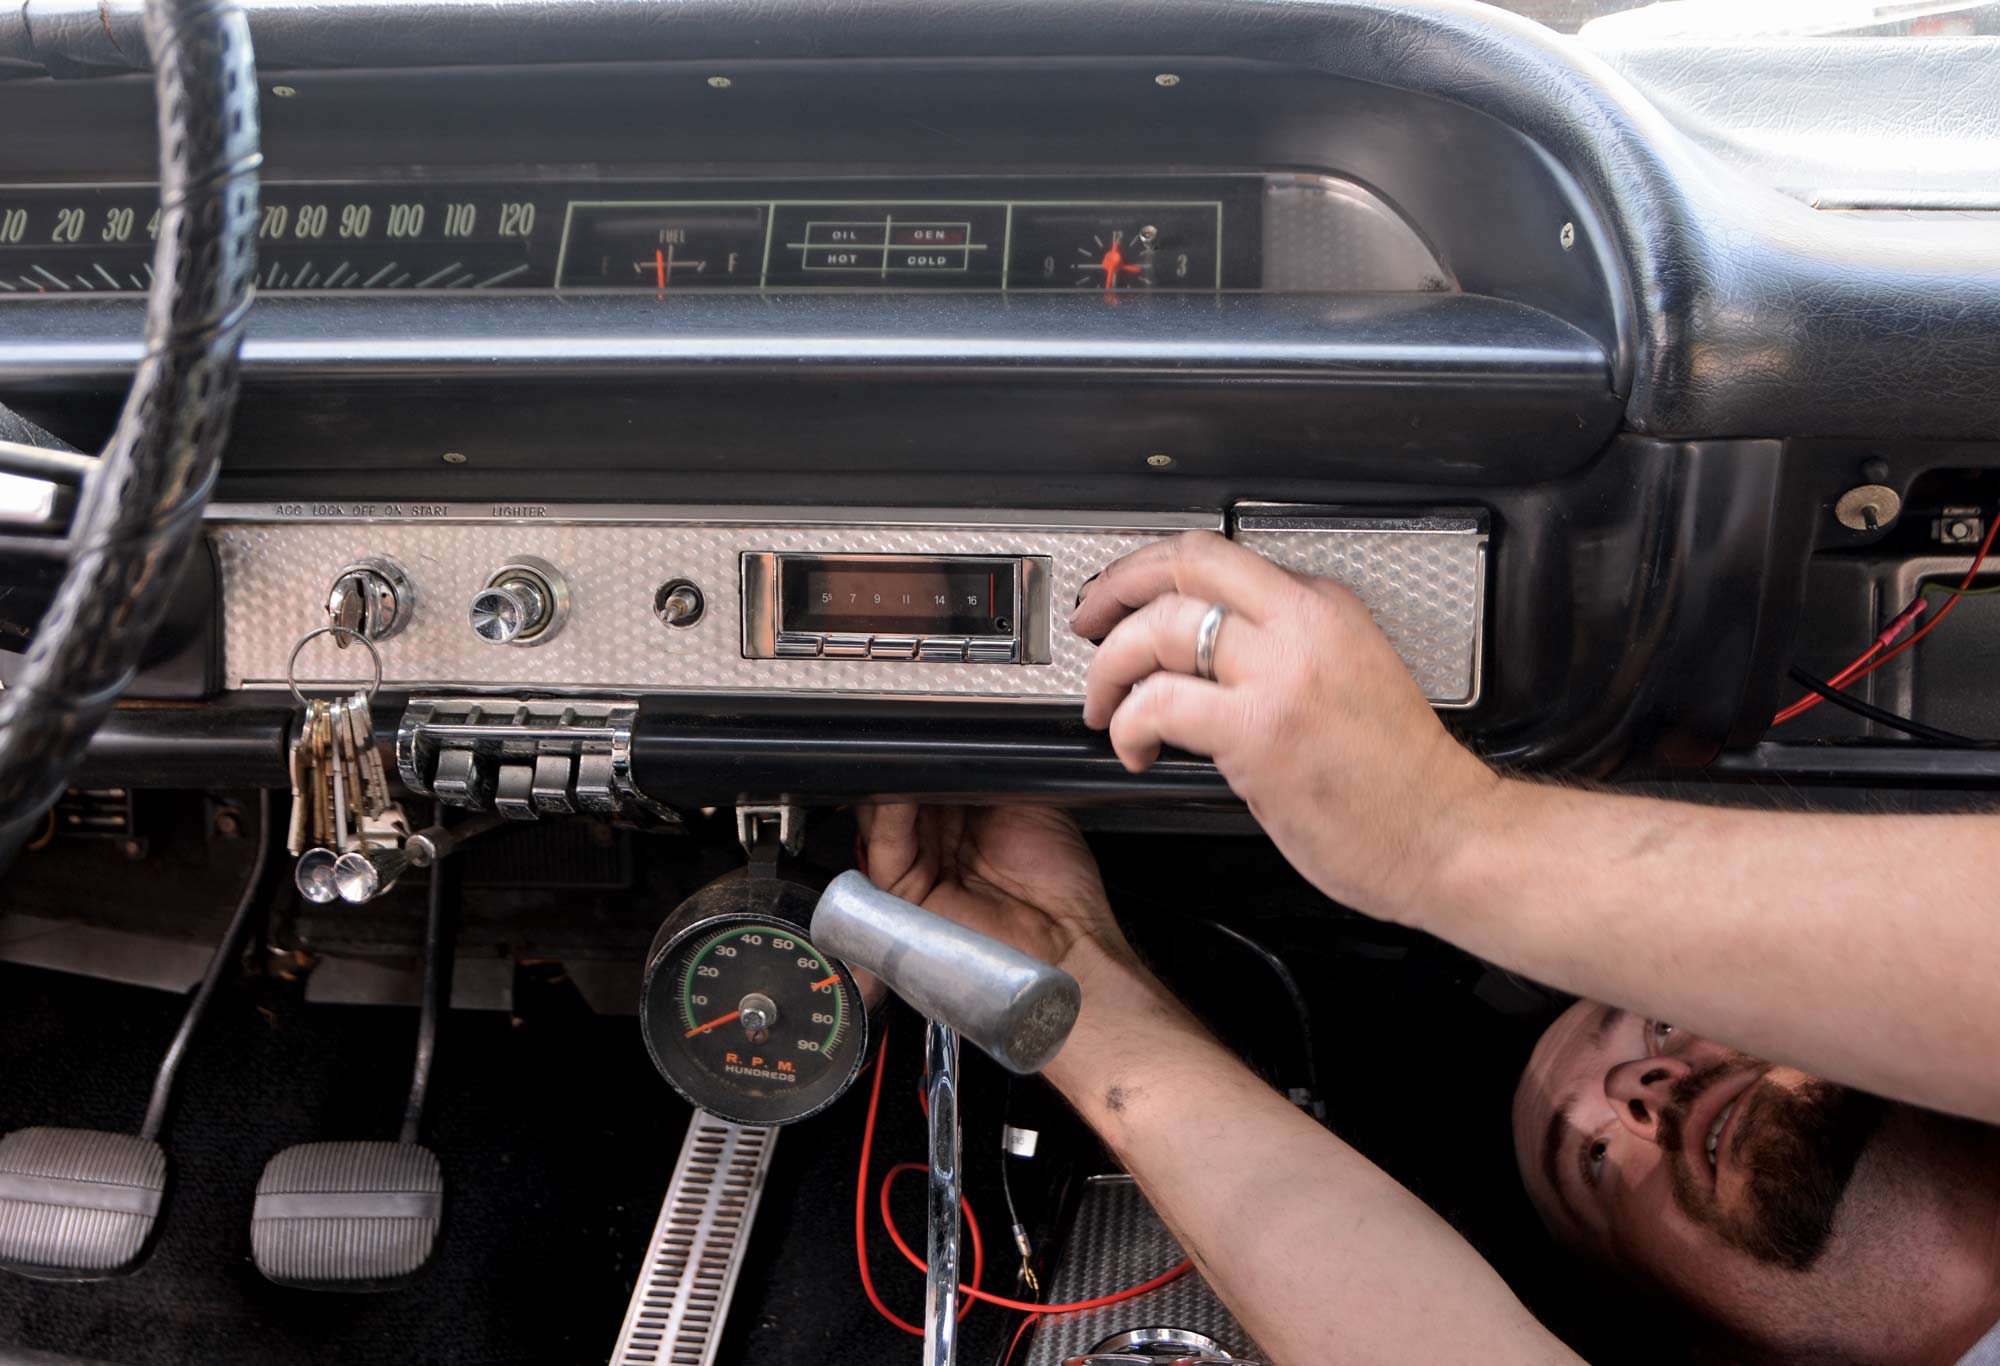 Man working on installing a new stereo under the dashboard